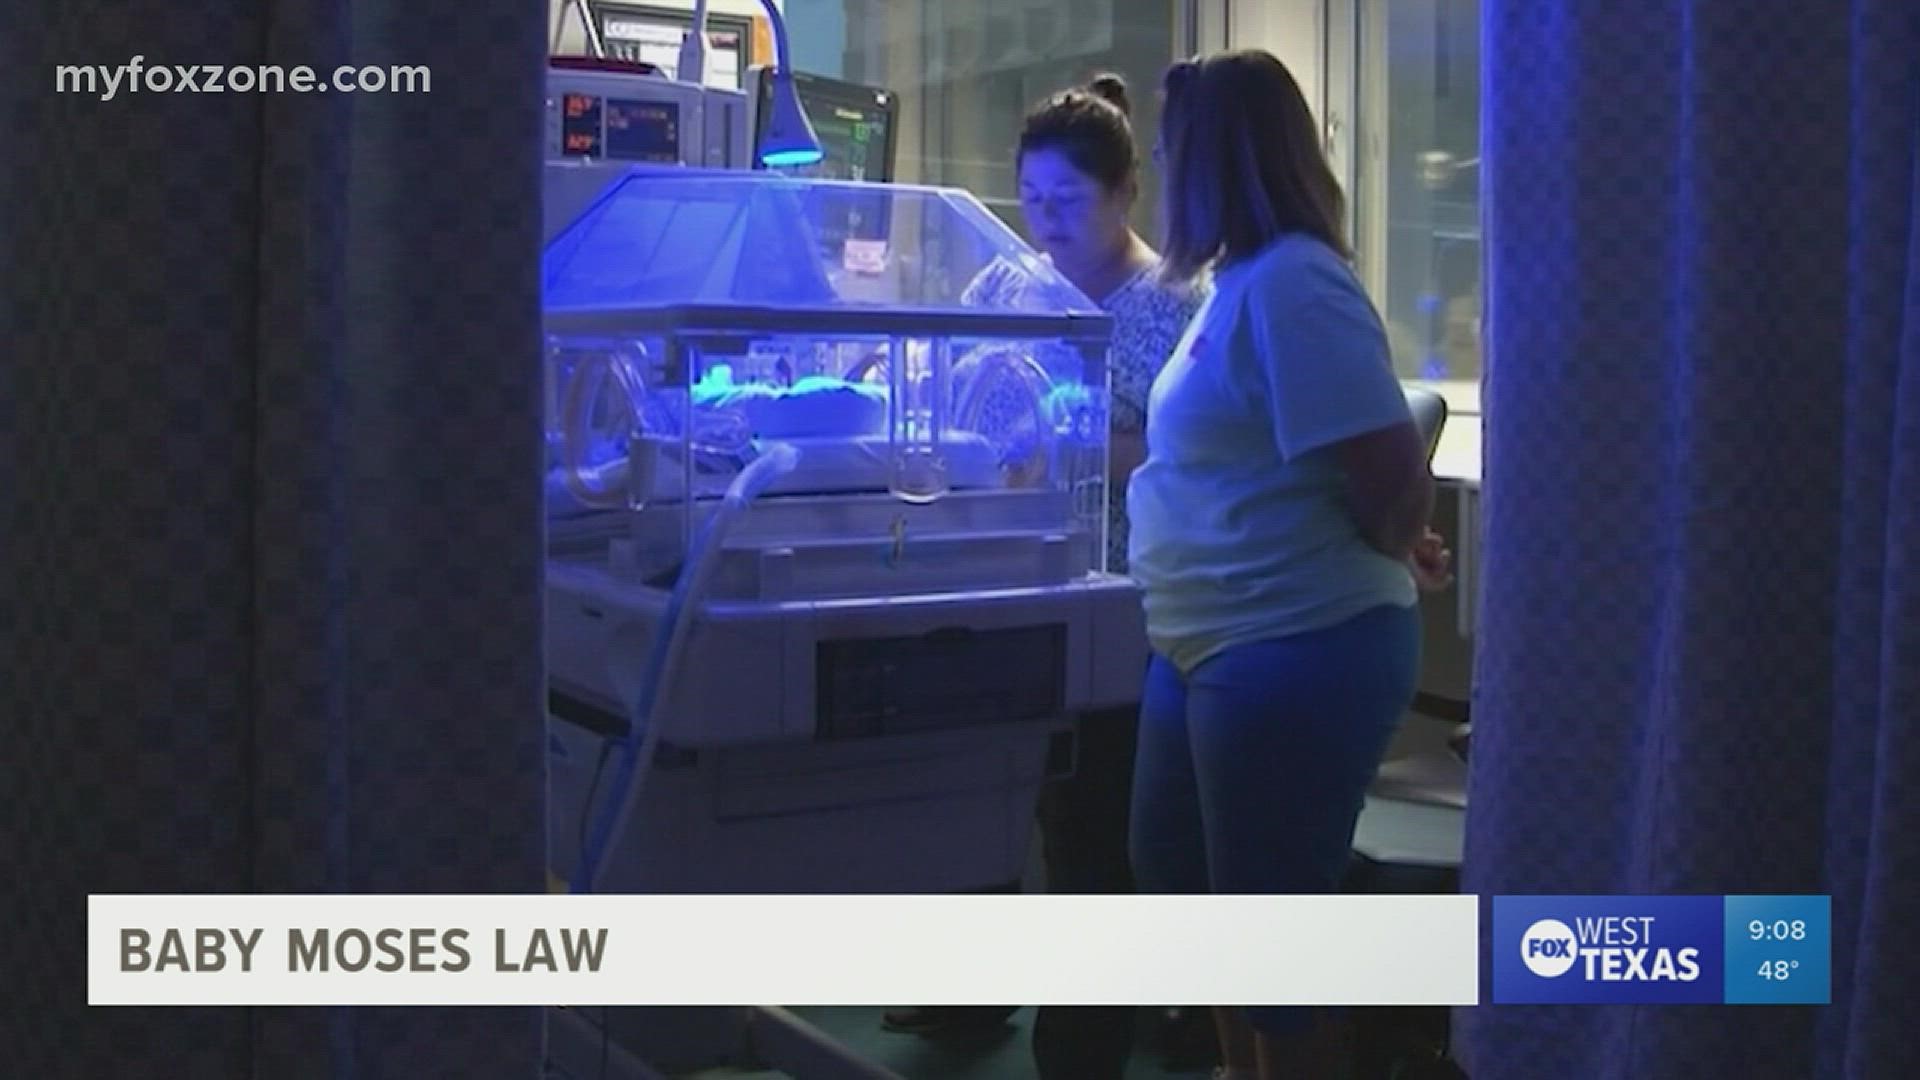 The "Baby Moses Law" allows mothers to drop-off newborns at fire departments and hospitals without repercussions.